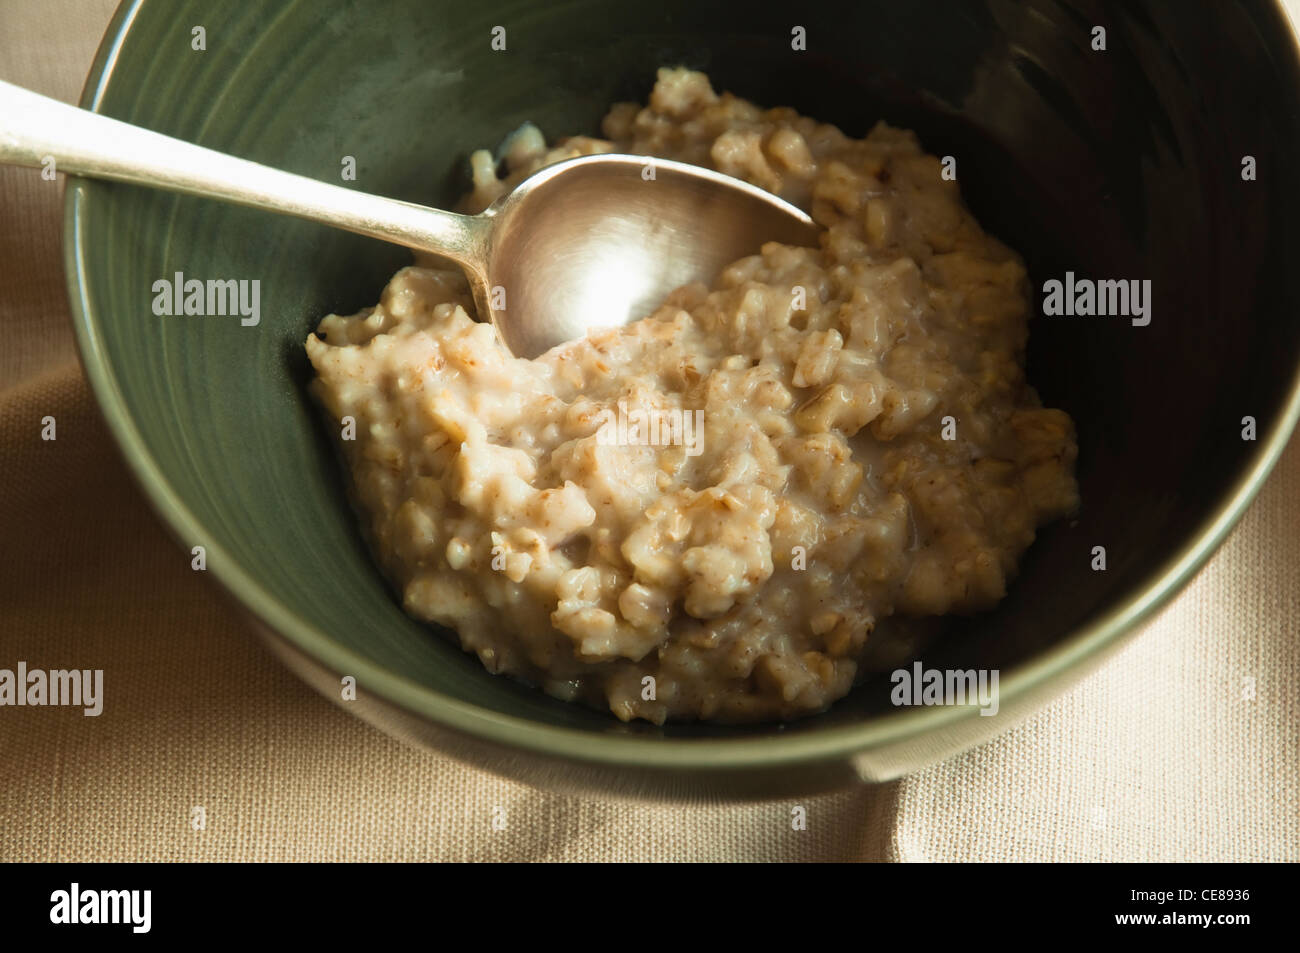 A serving of porridge in a bowl. Stock Photo